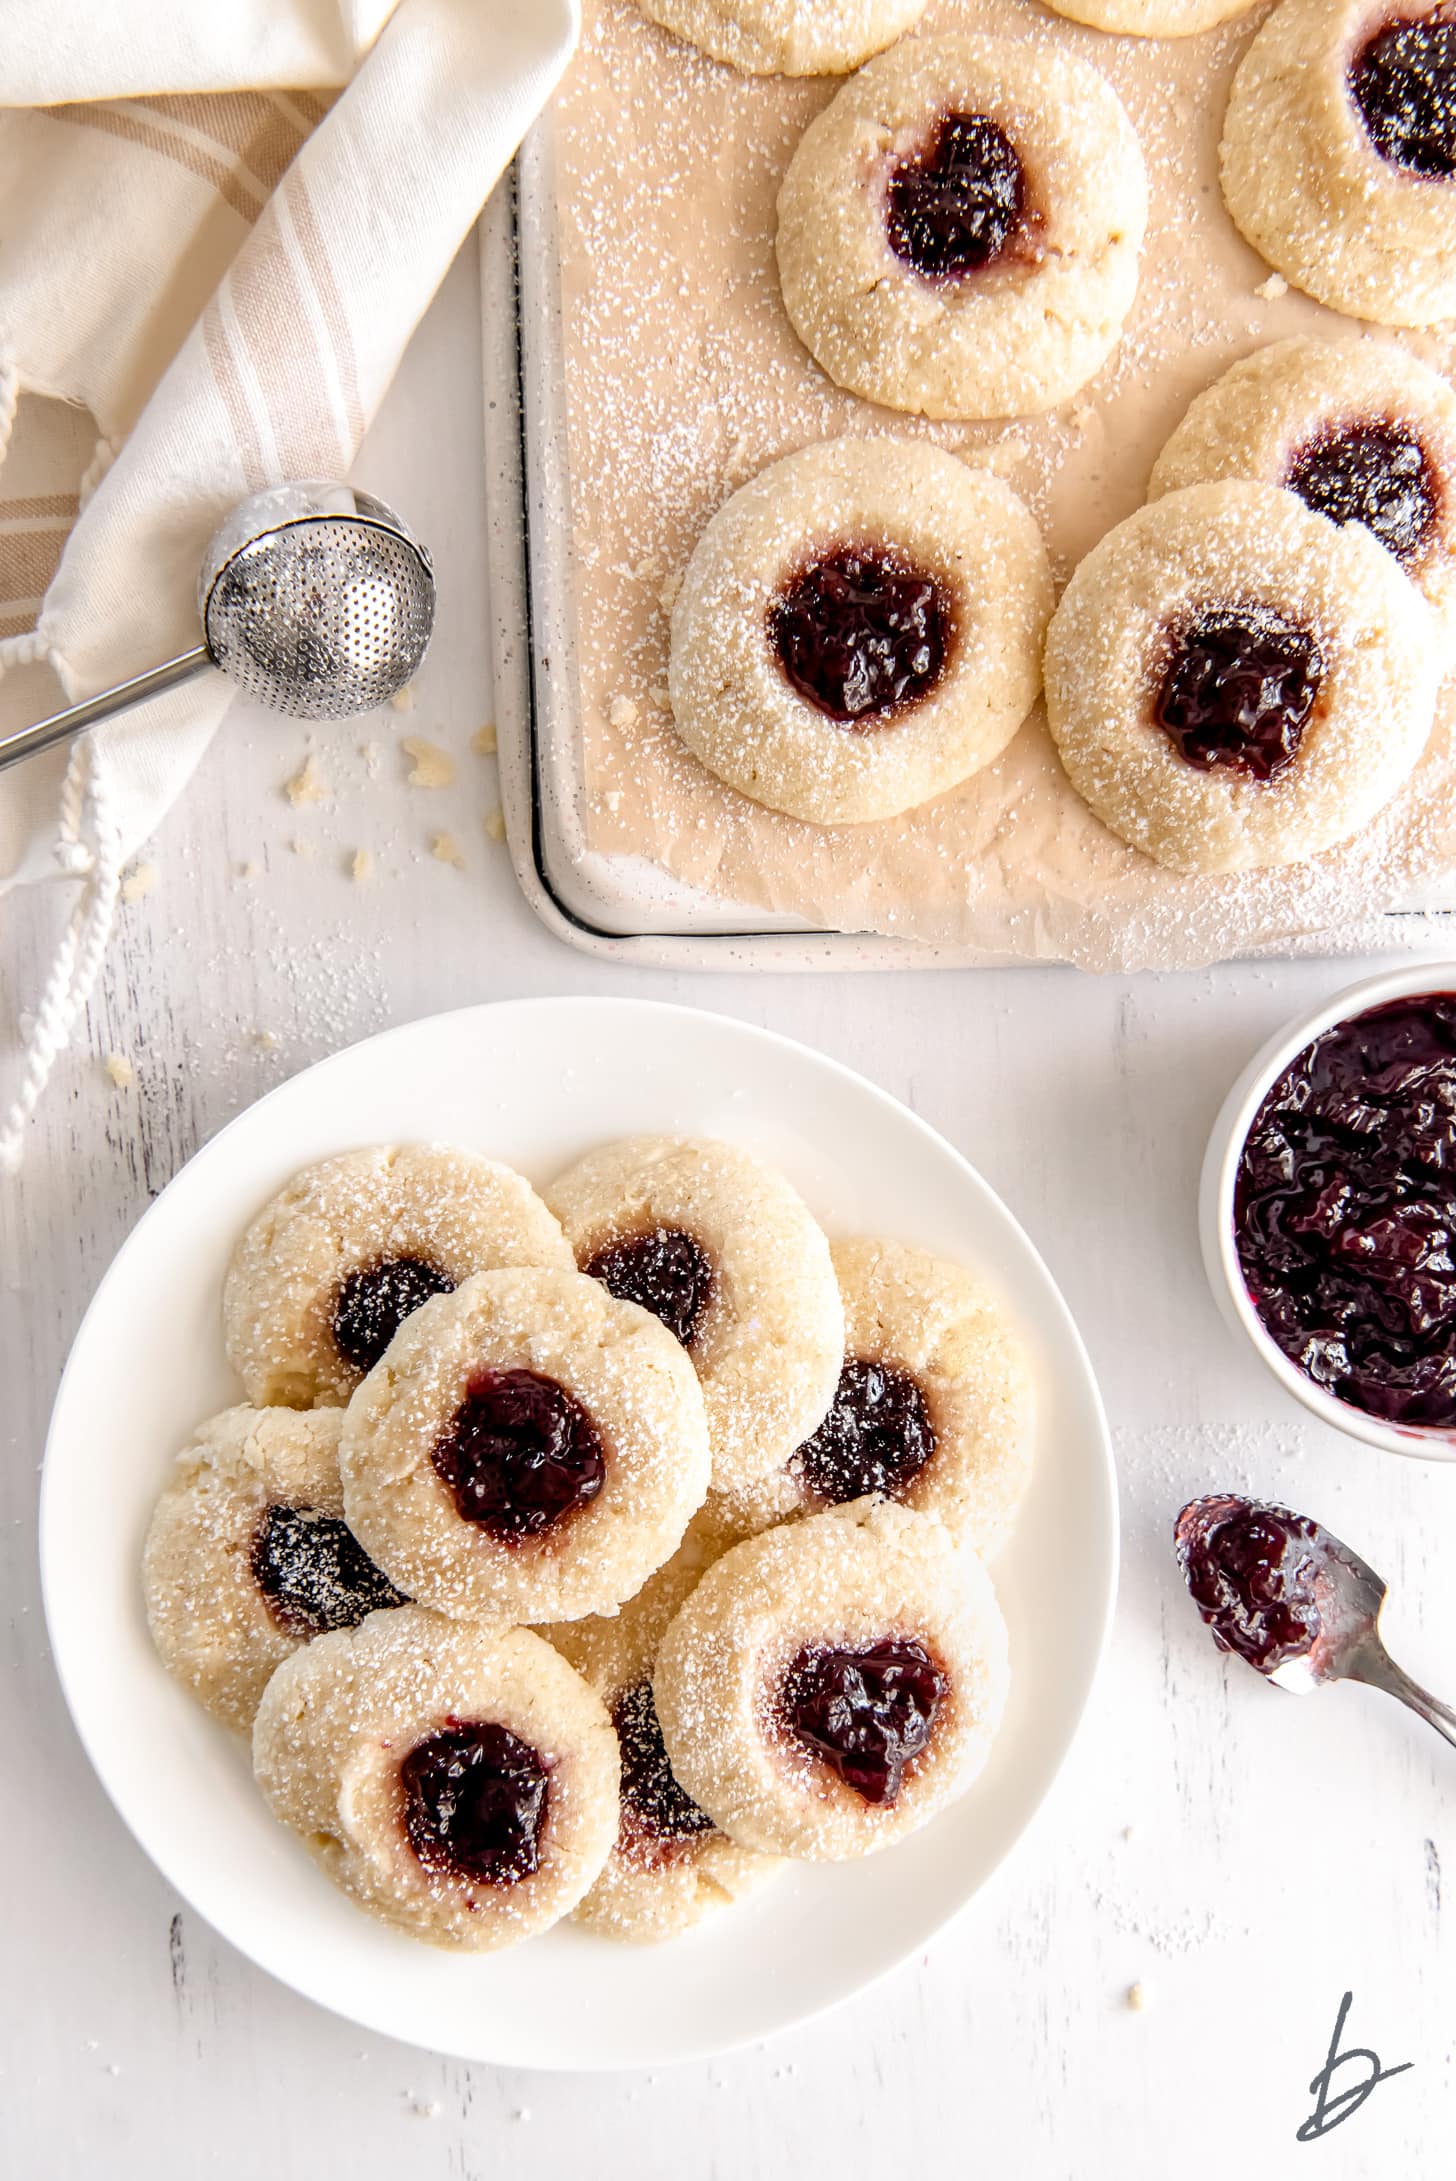 jam thumbprint cookies on a round plate next to bowl of jam and parchment paper with more cookies